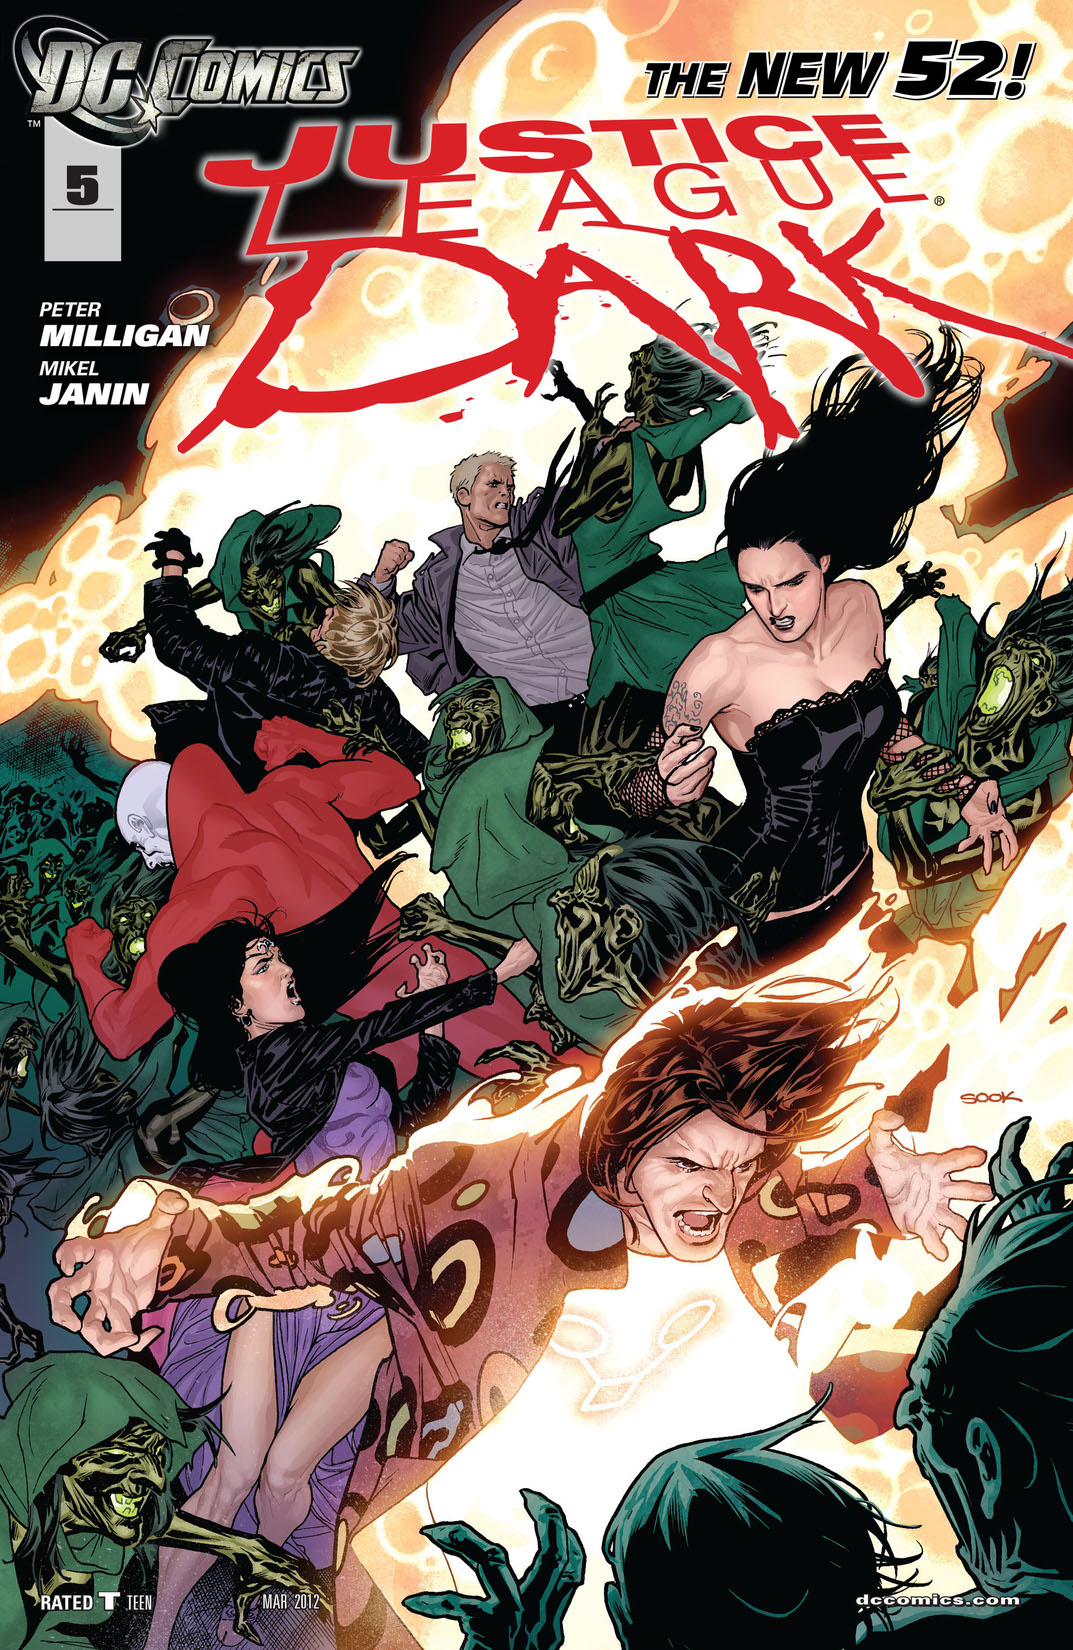 Justice League Dark (2011-) #5 preview images